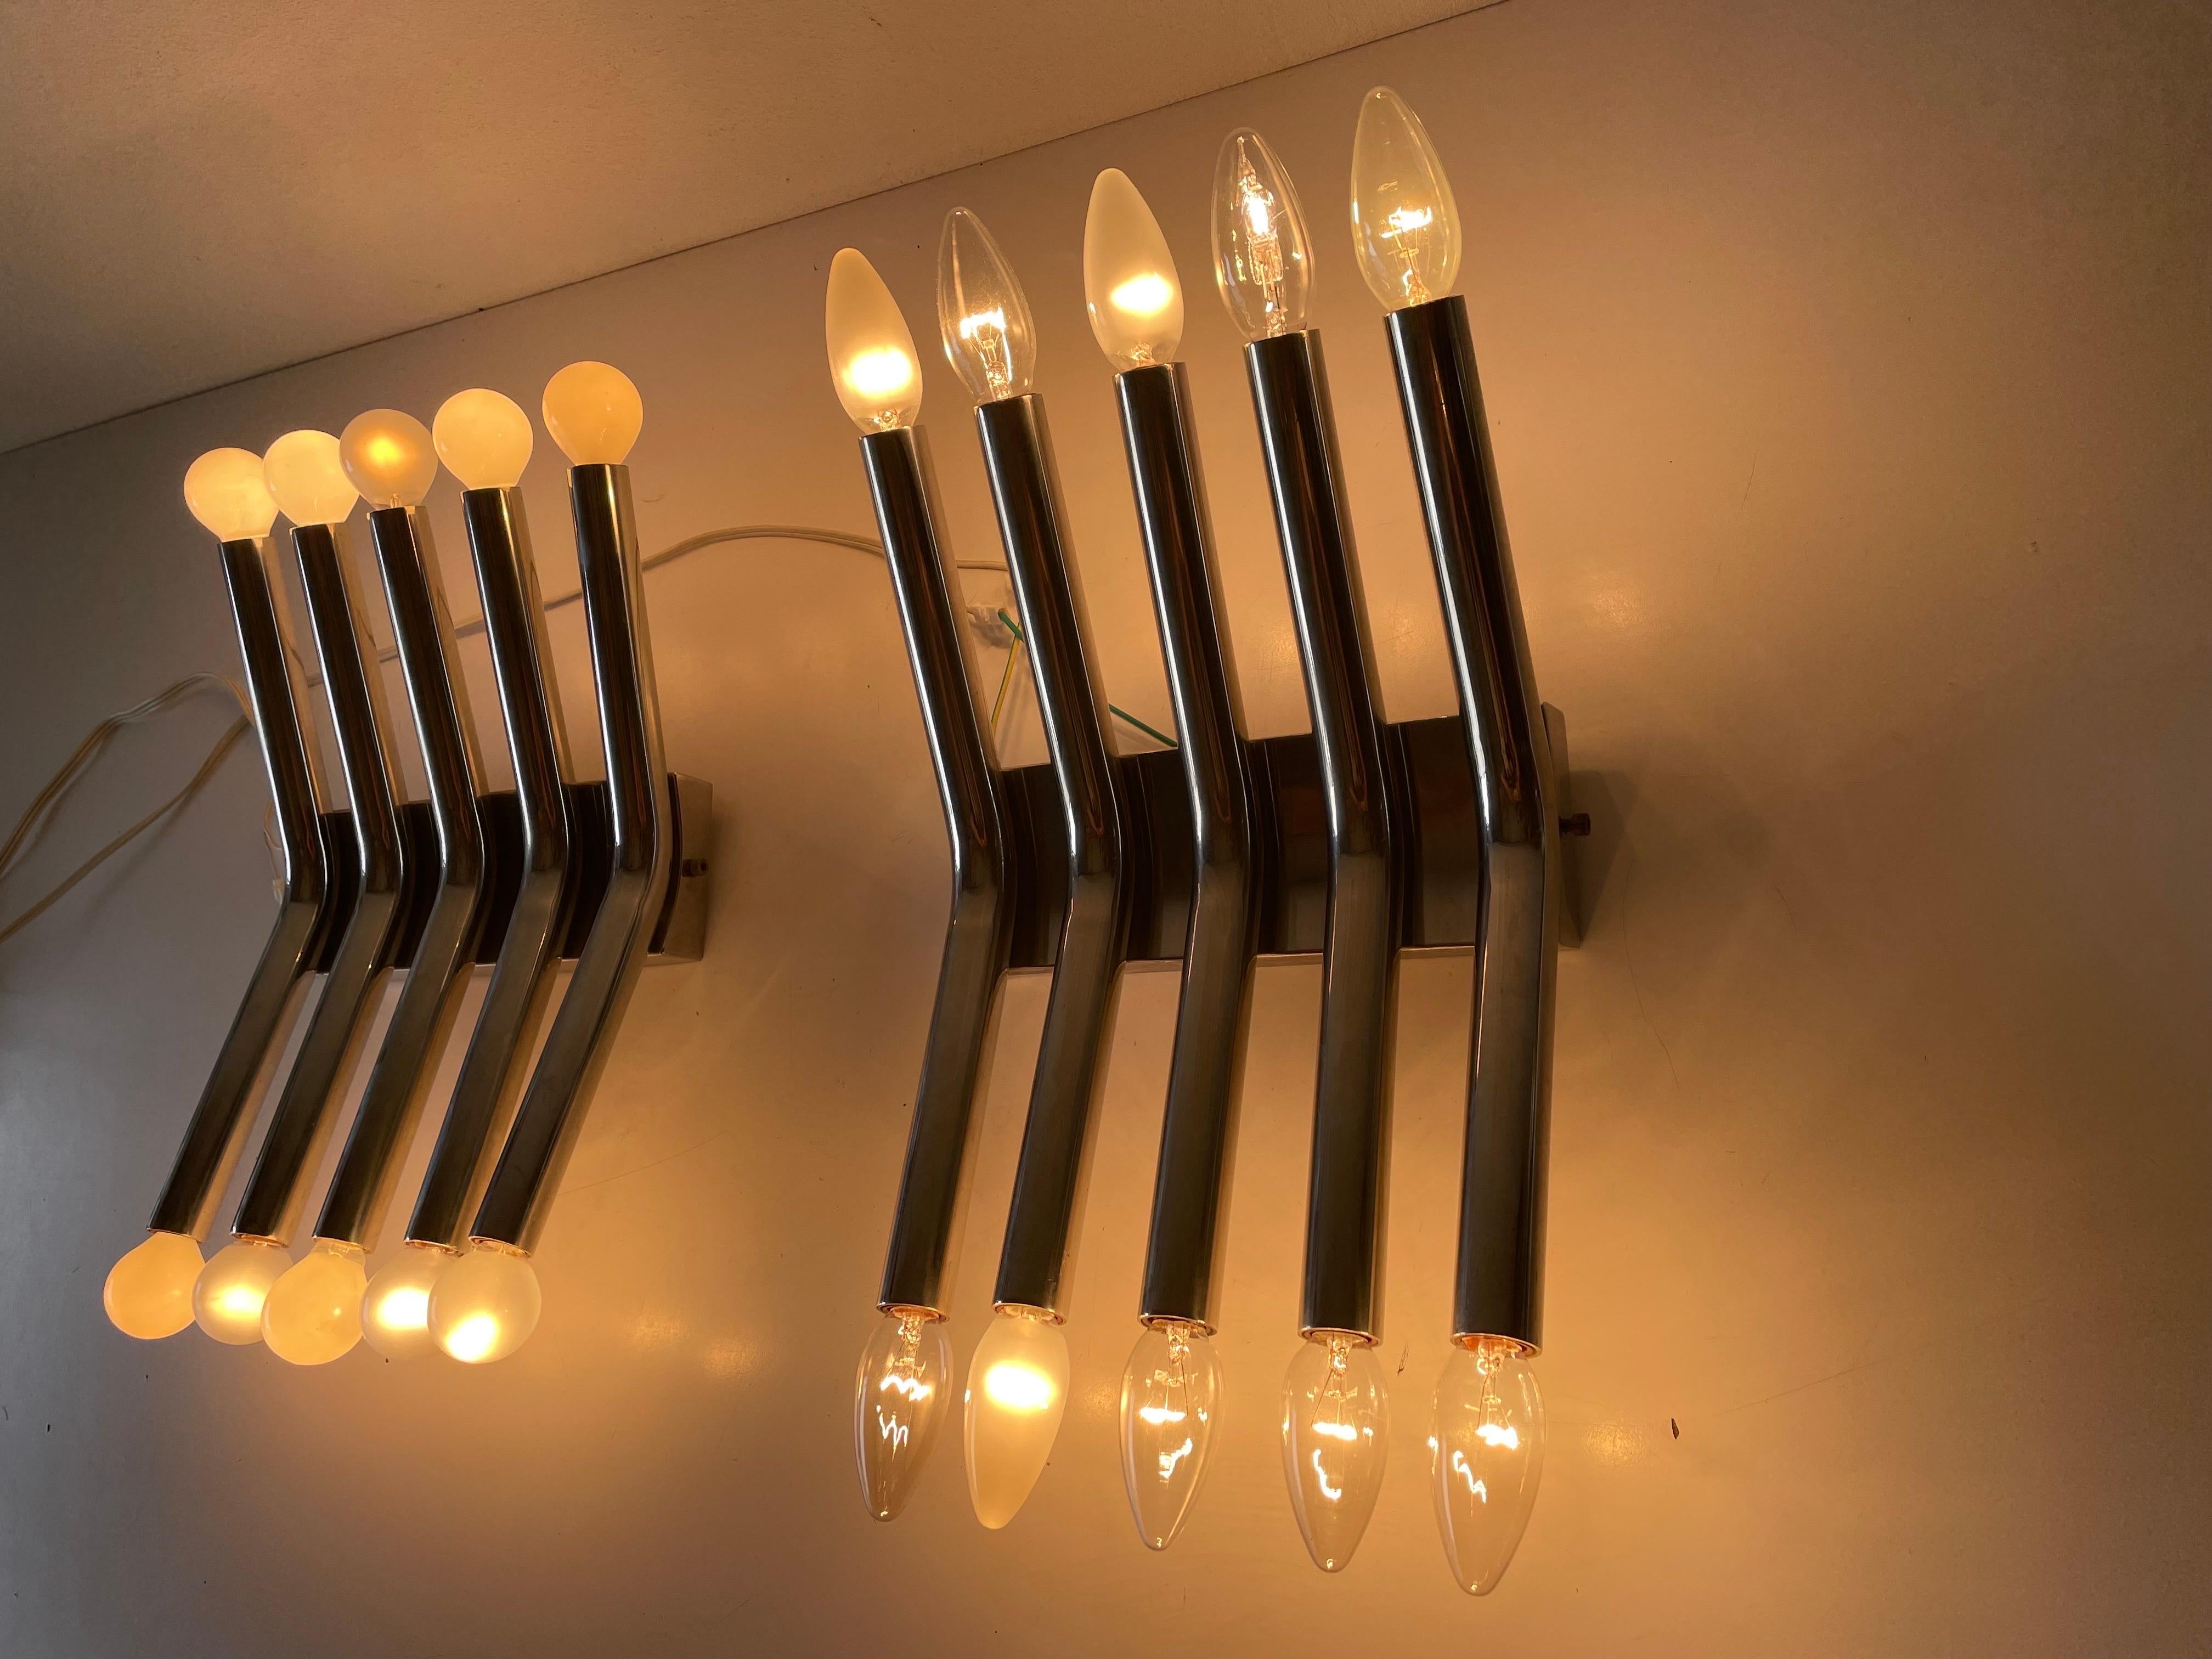 5-armed Tubes Design Pair of Chrome Italian Sconces by Reggiani, 1960s Italy For Sale 6